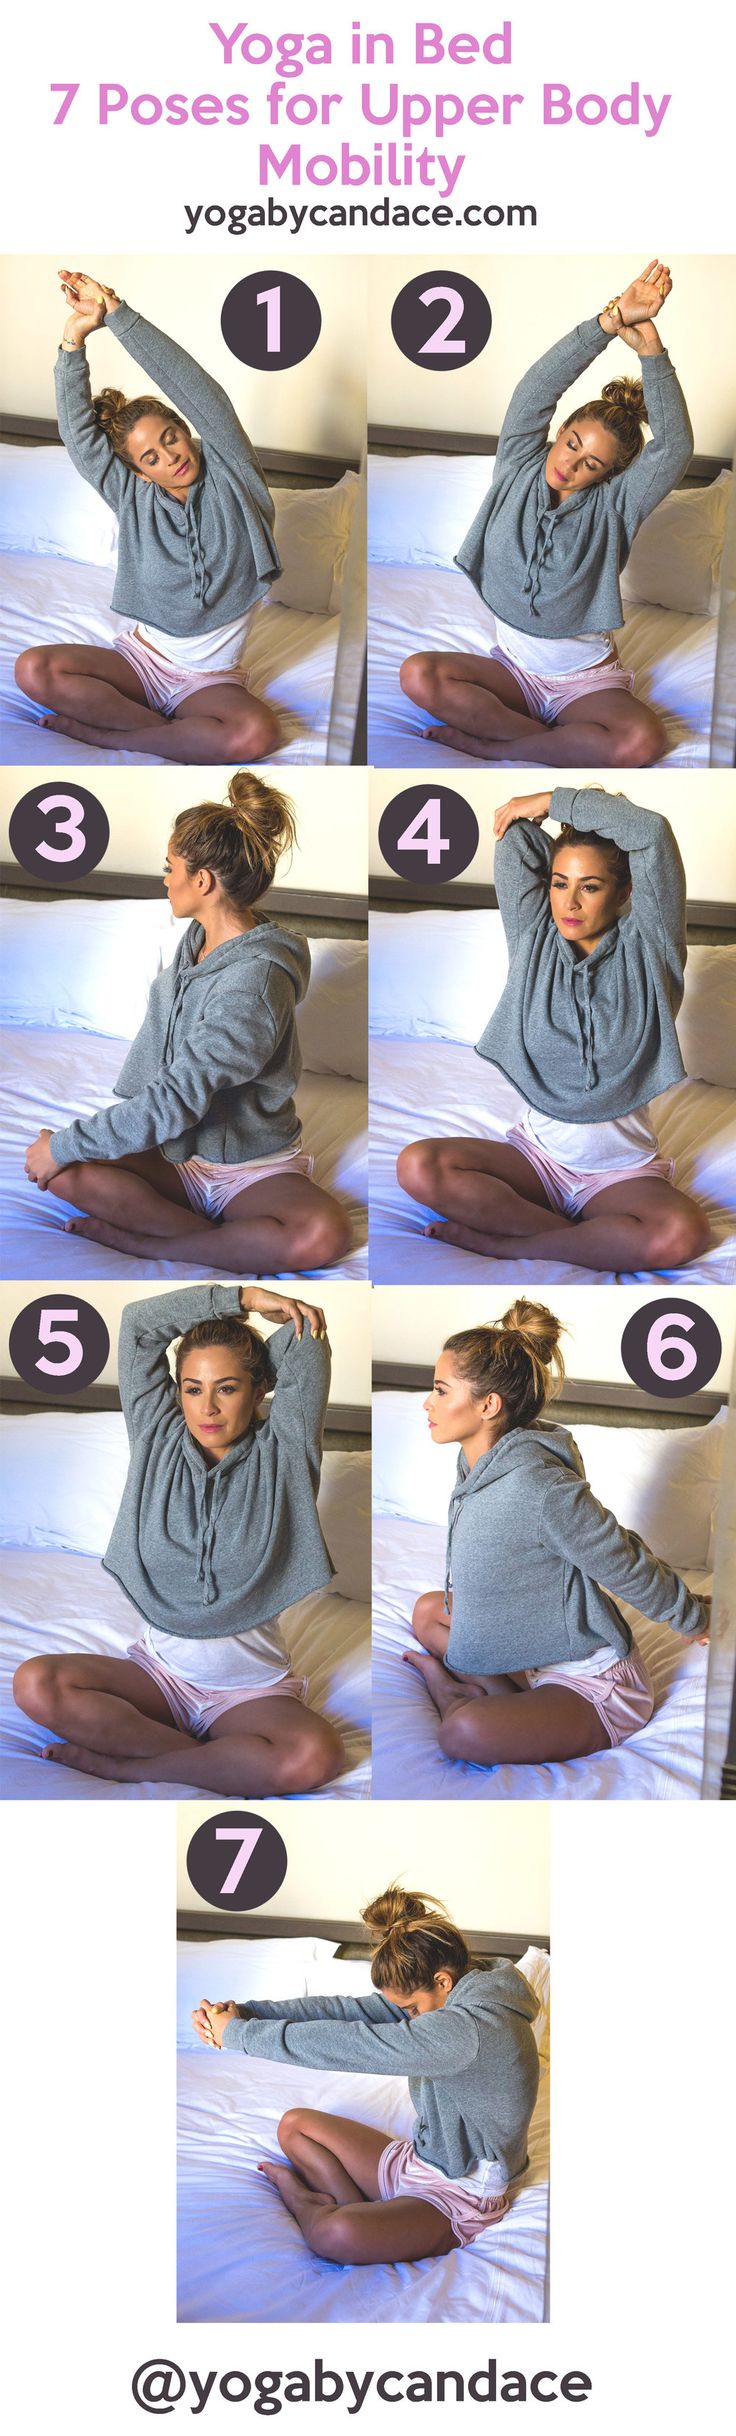 Yoga in Bed - 7 Poses for Upper Body Mobility!